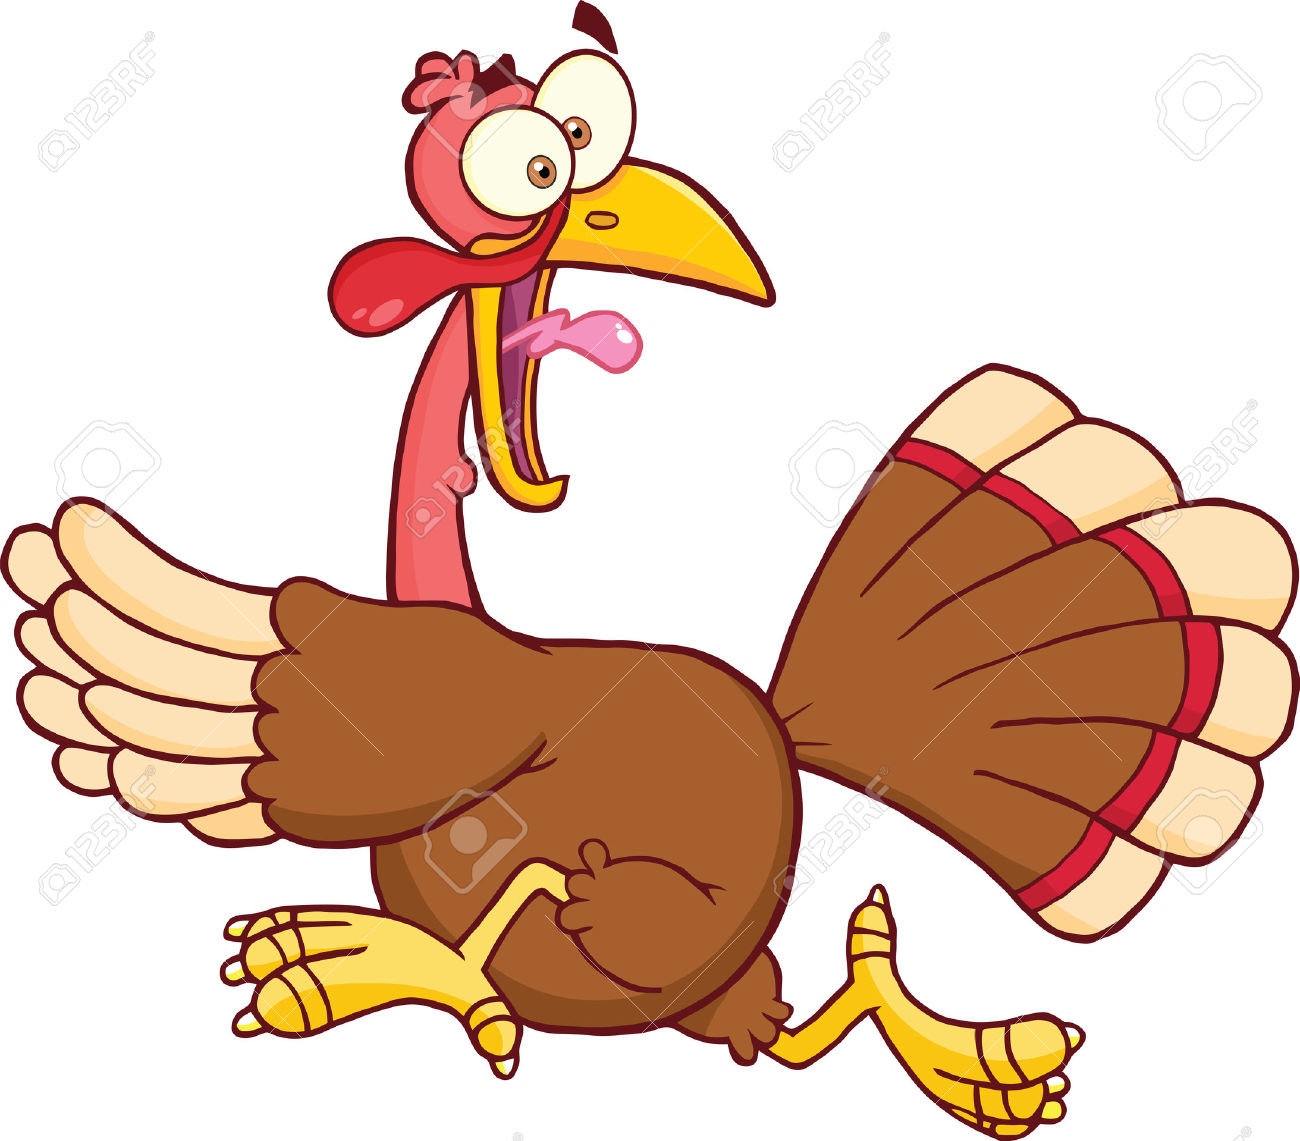 Animated Turkey Pictures.